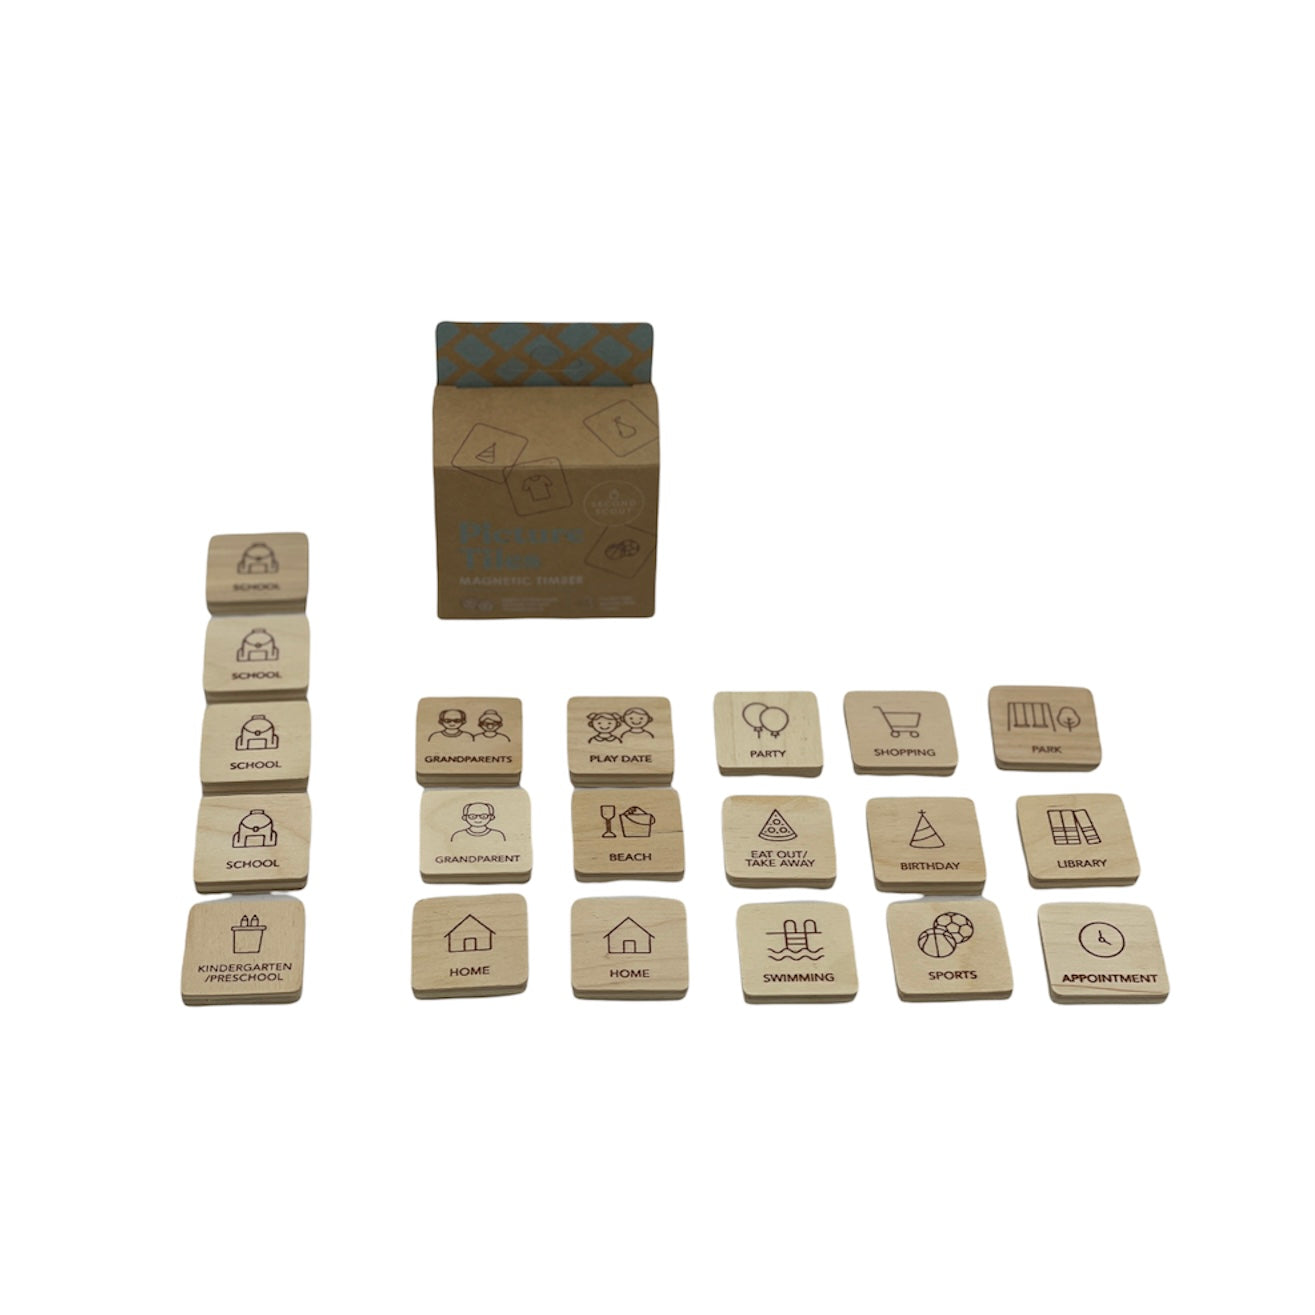 Second Scout Picture Tiles - Starter Pack with wooden magnetic tiles laid out in front front of packaging box on white background